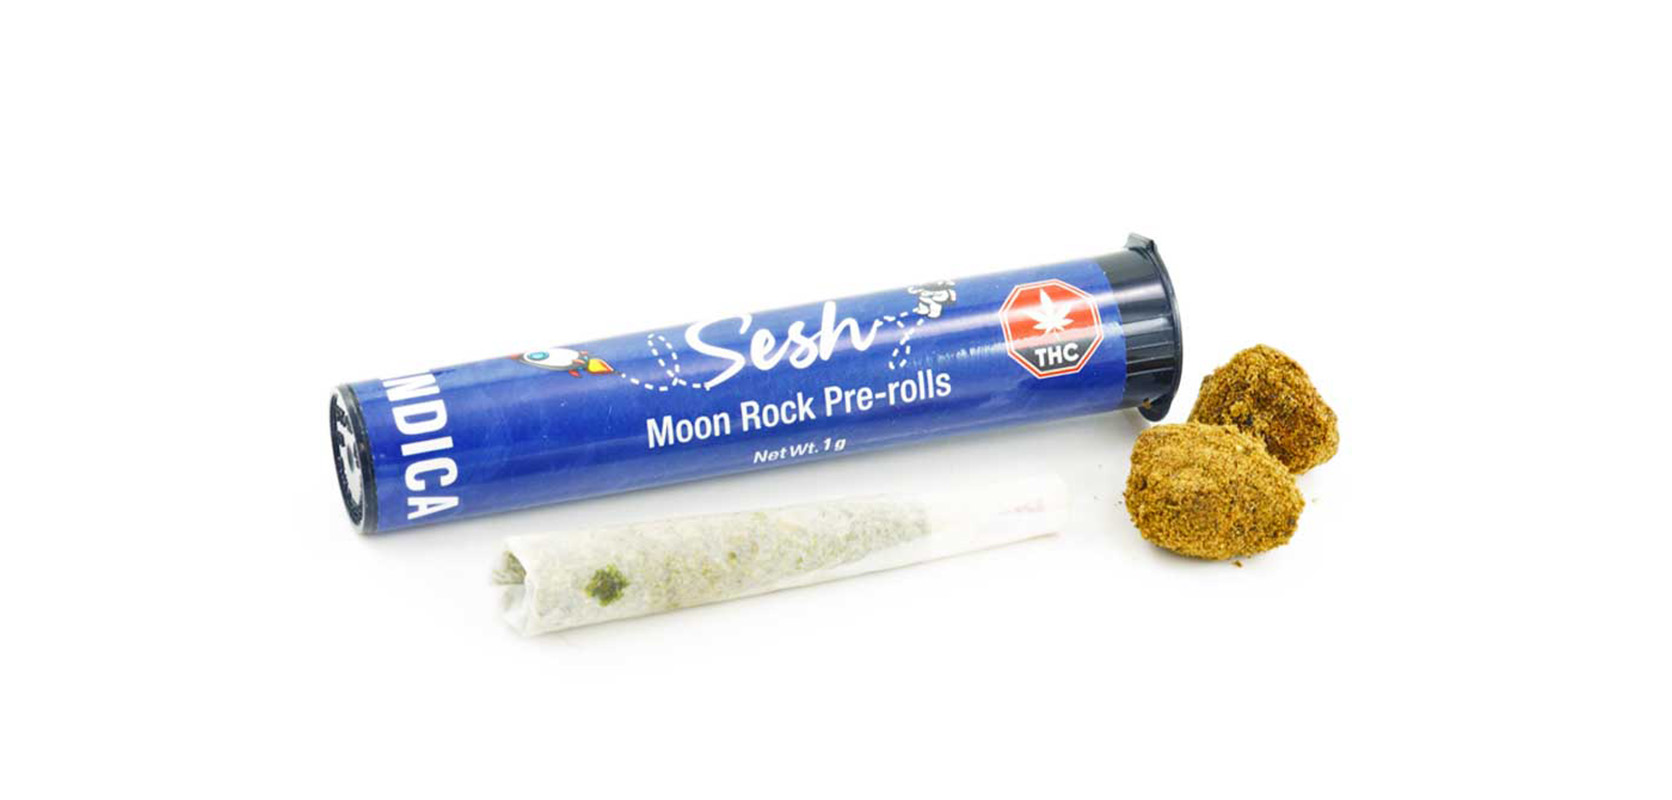 Sesh Moonrock Joints. Preroll moon rock weed. weed dispensary to buy cheapweed online in Canada. Shatter. buy online weeds.